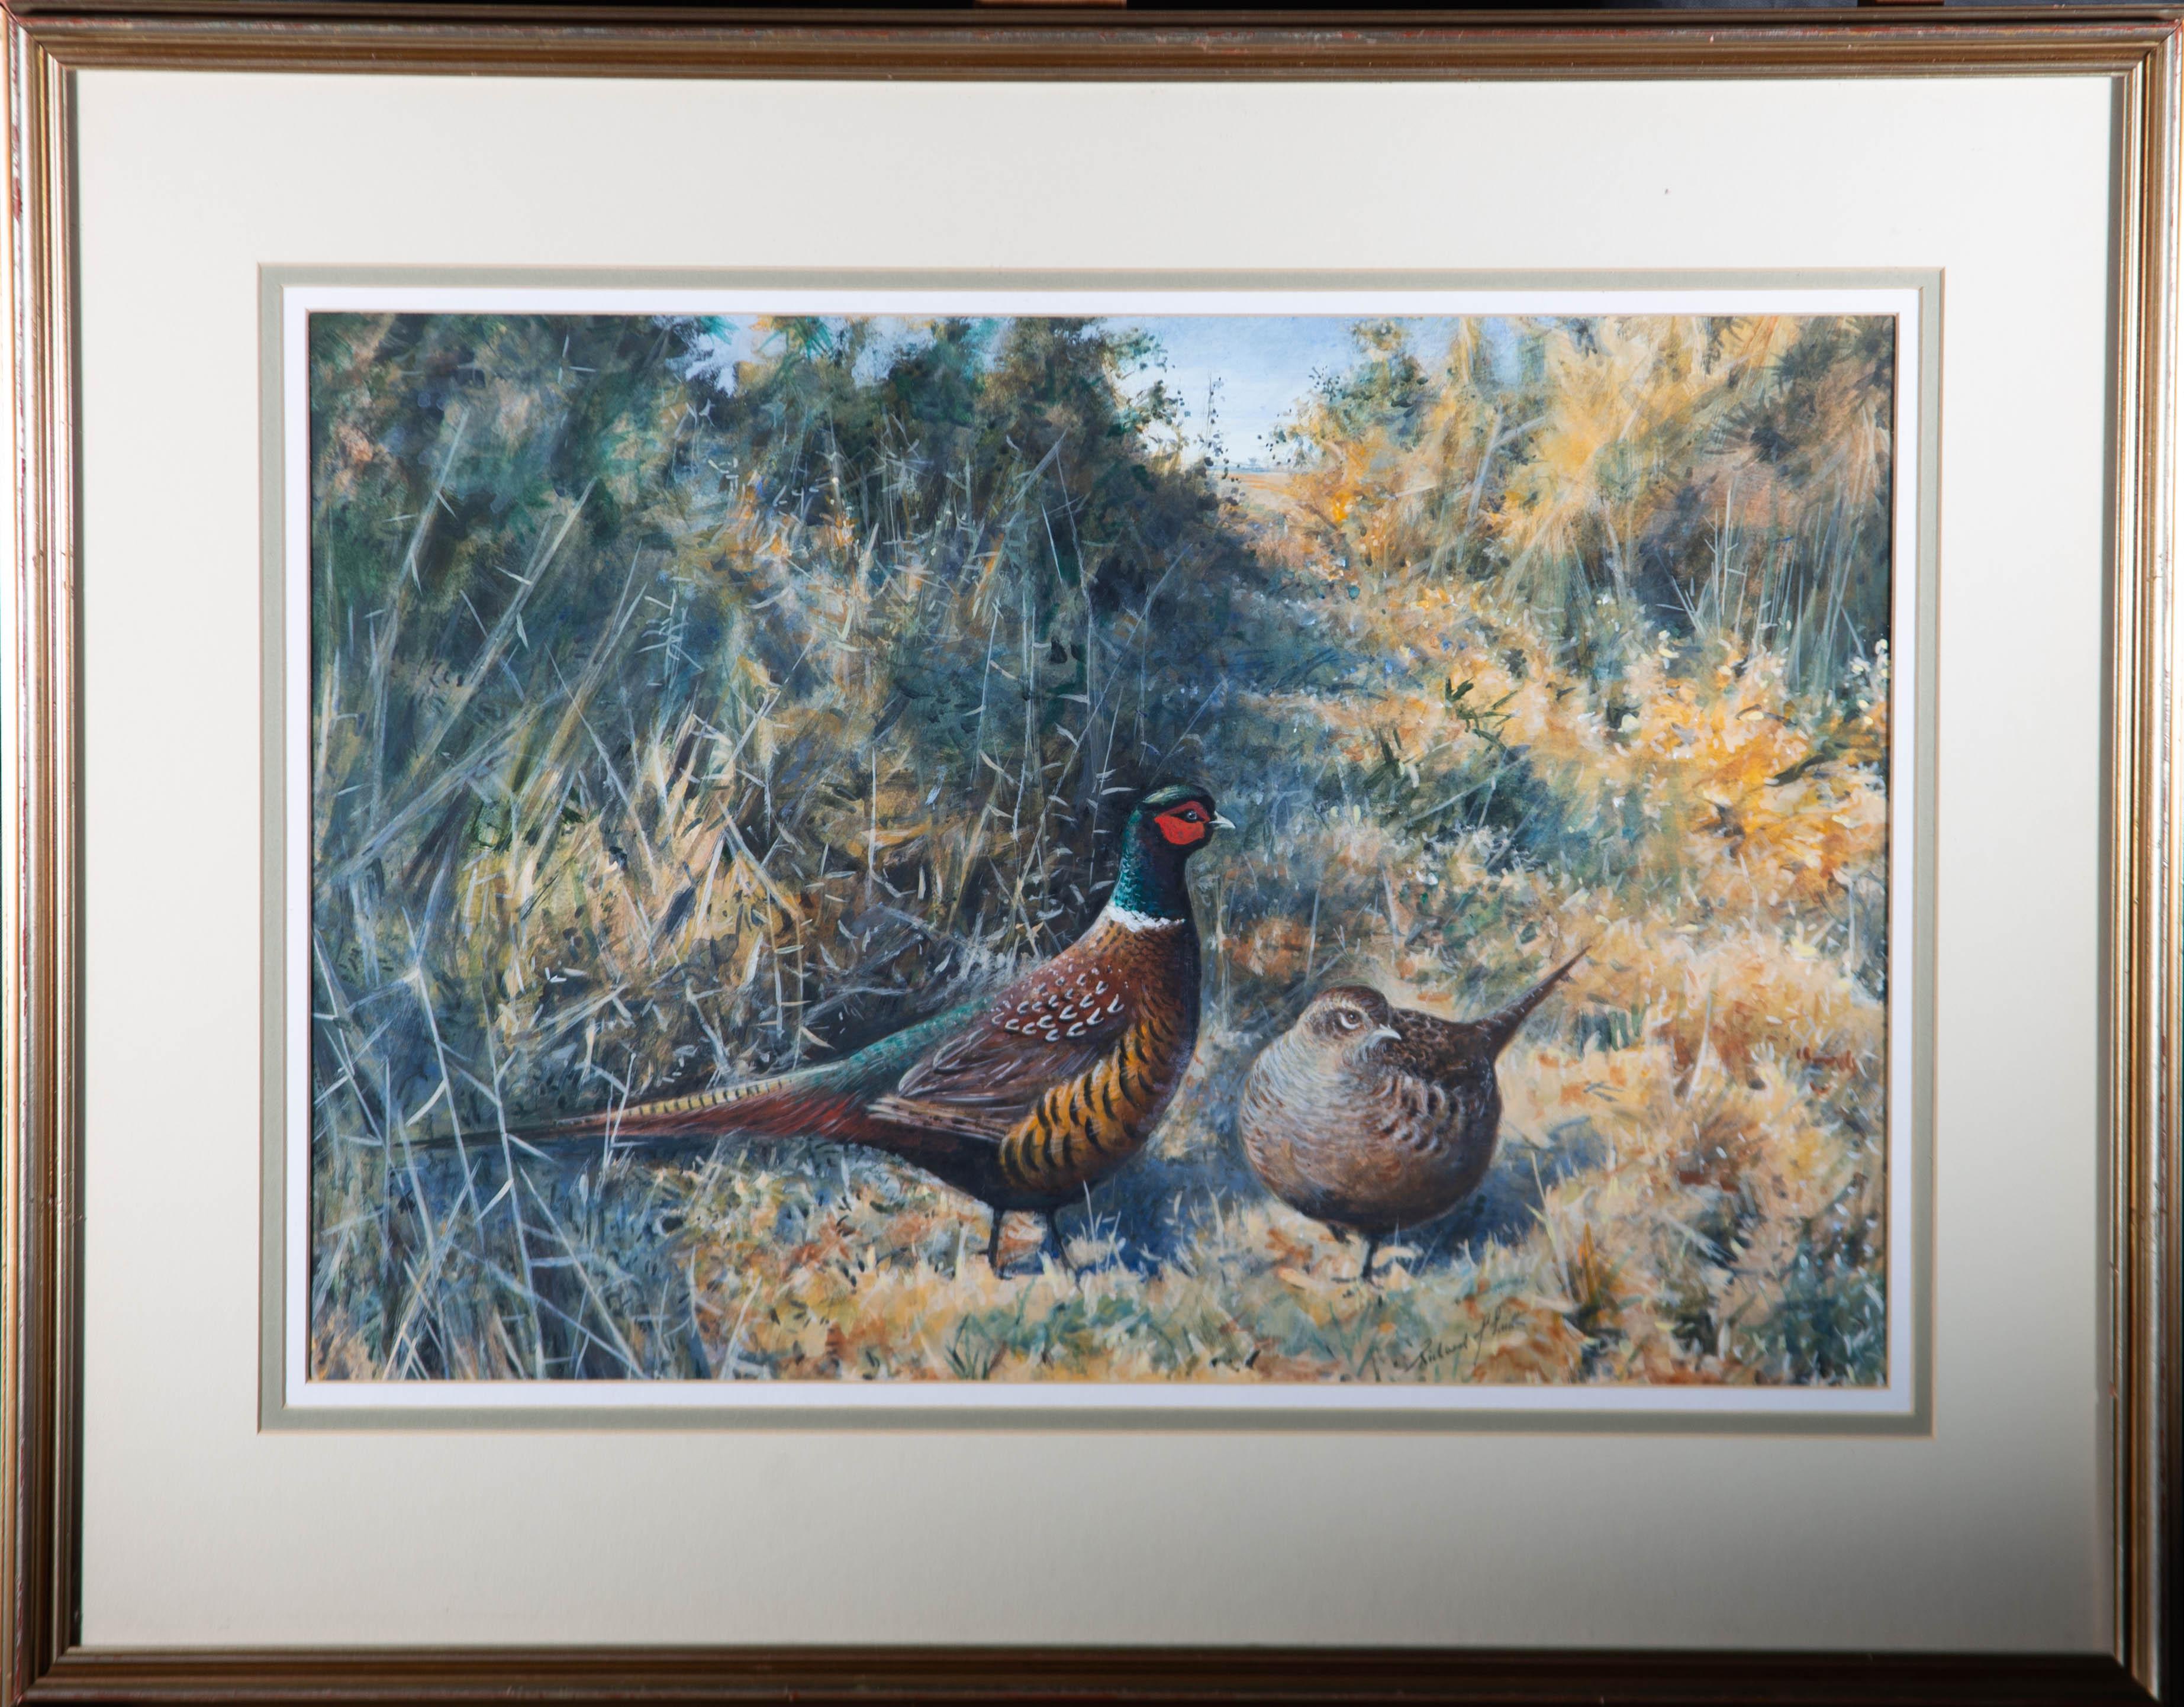 A fine ornithological study of a pair of male and female pheasants strutting through the undergrowth at the edge of a field. The artist has signed to the lower right edge. The painting is presented in a contemporary gilt effect frame with a layered